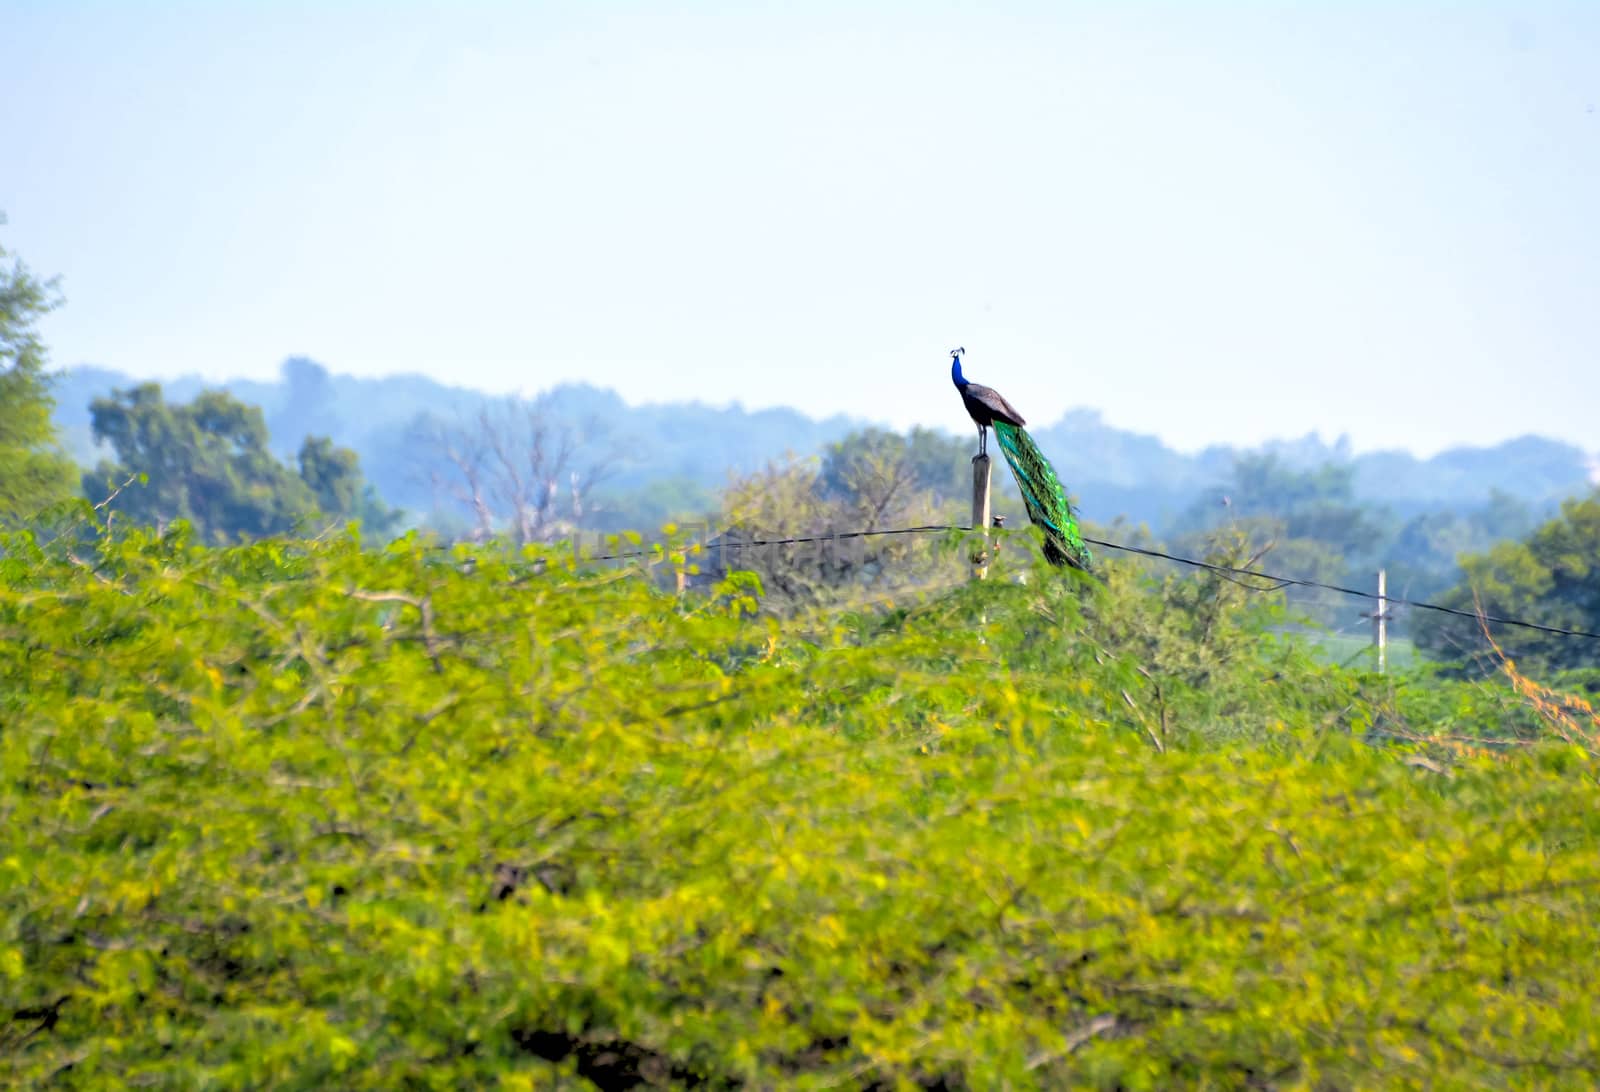 Indian peafowl or peacock sitting on a top of pole by rkbalaji